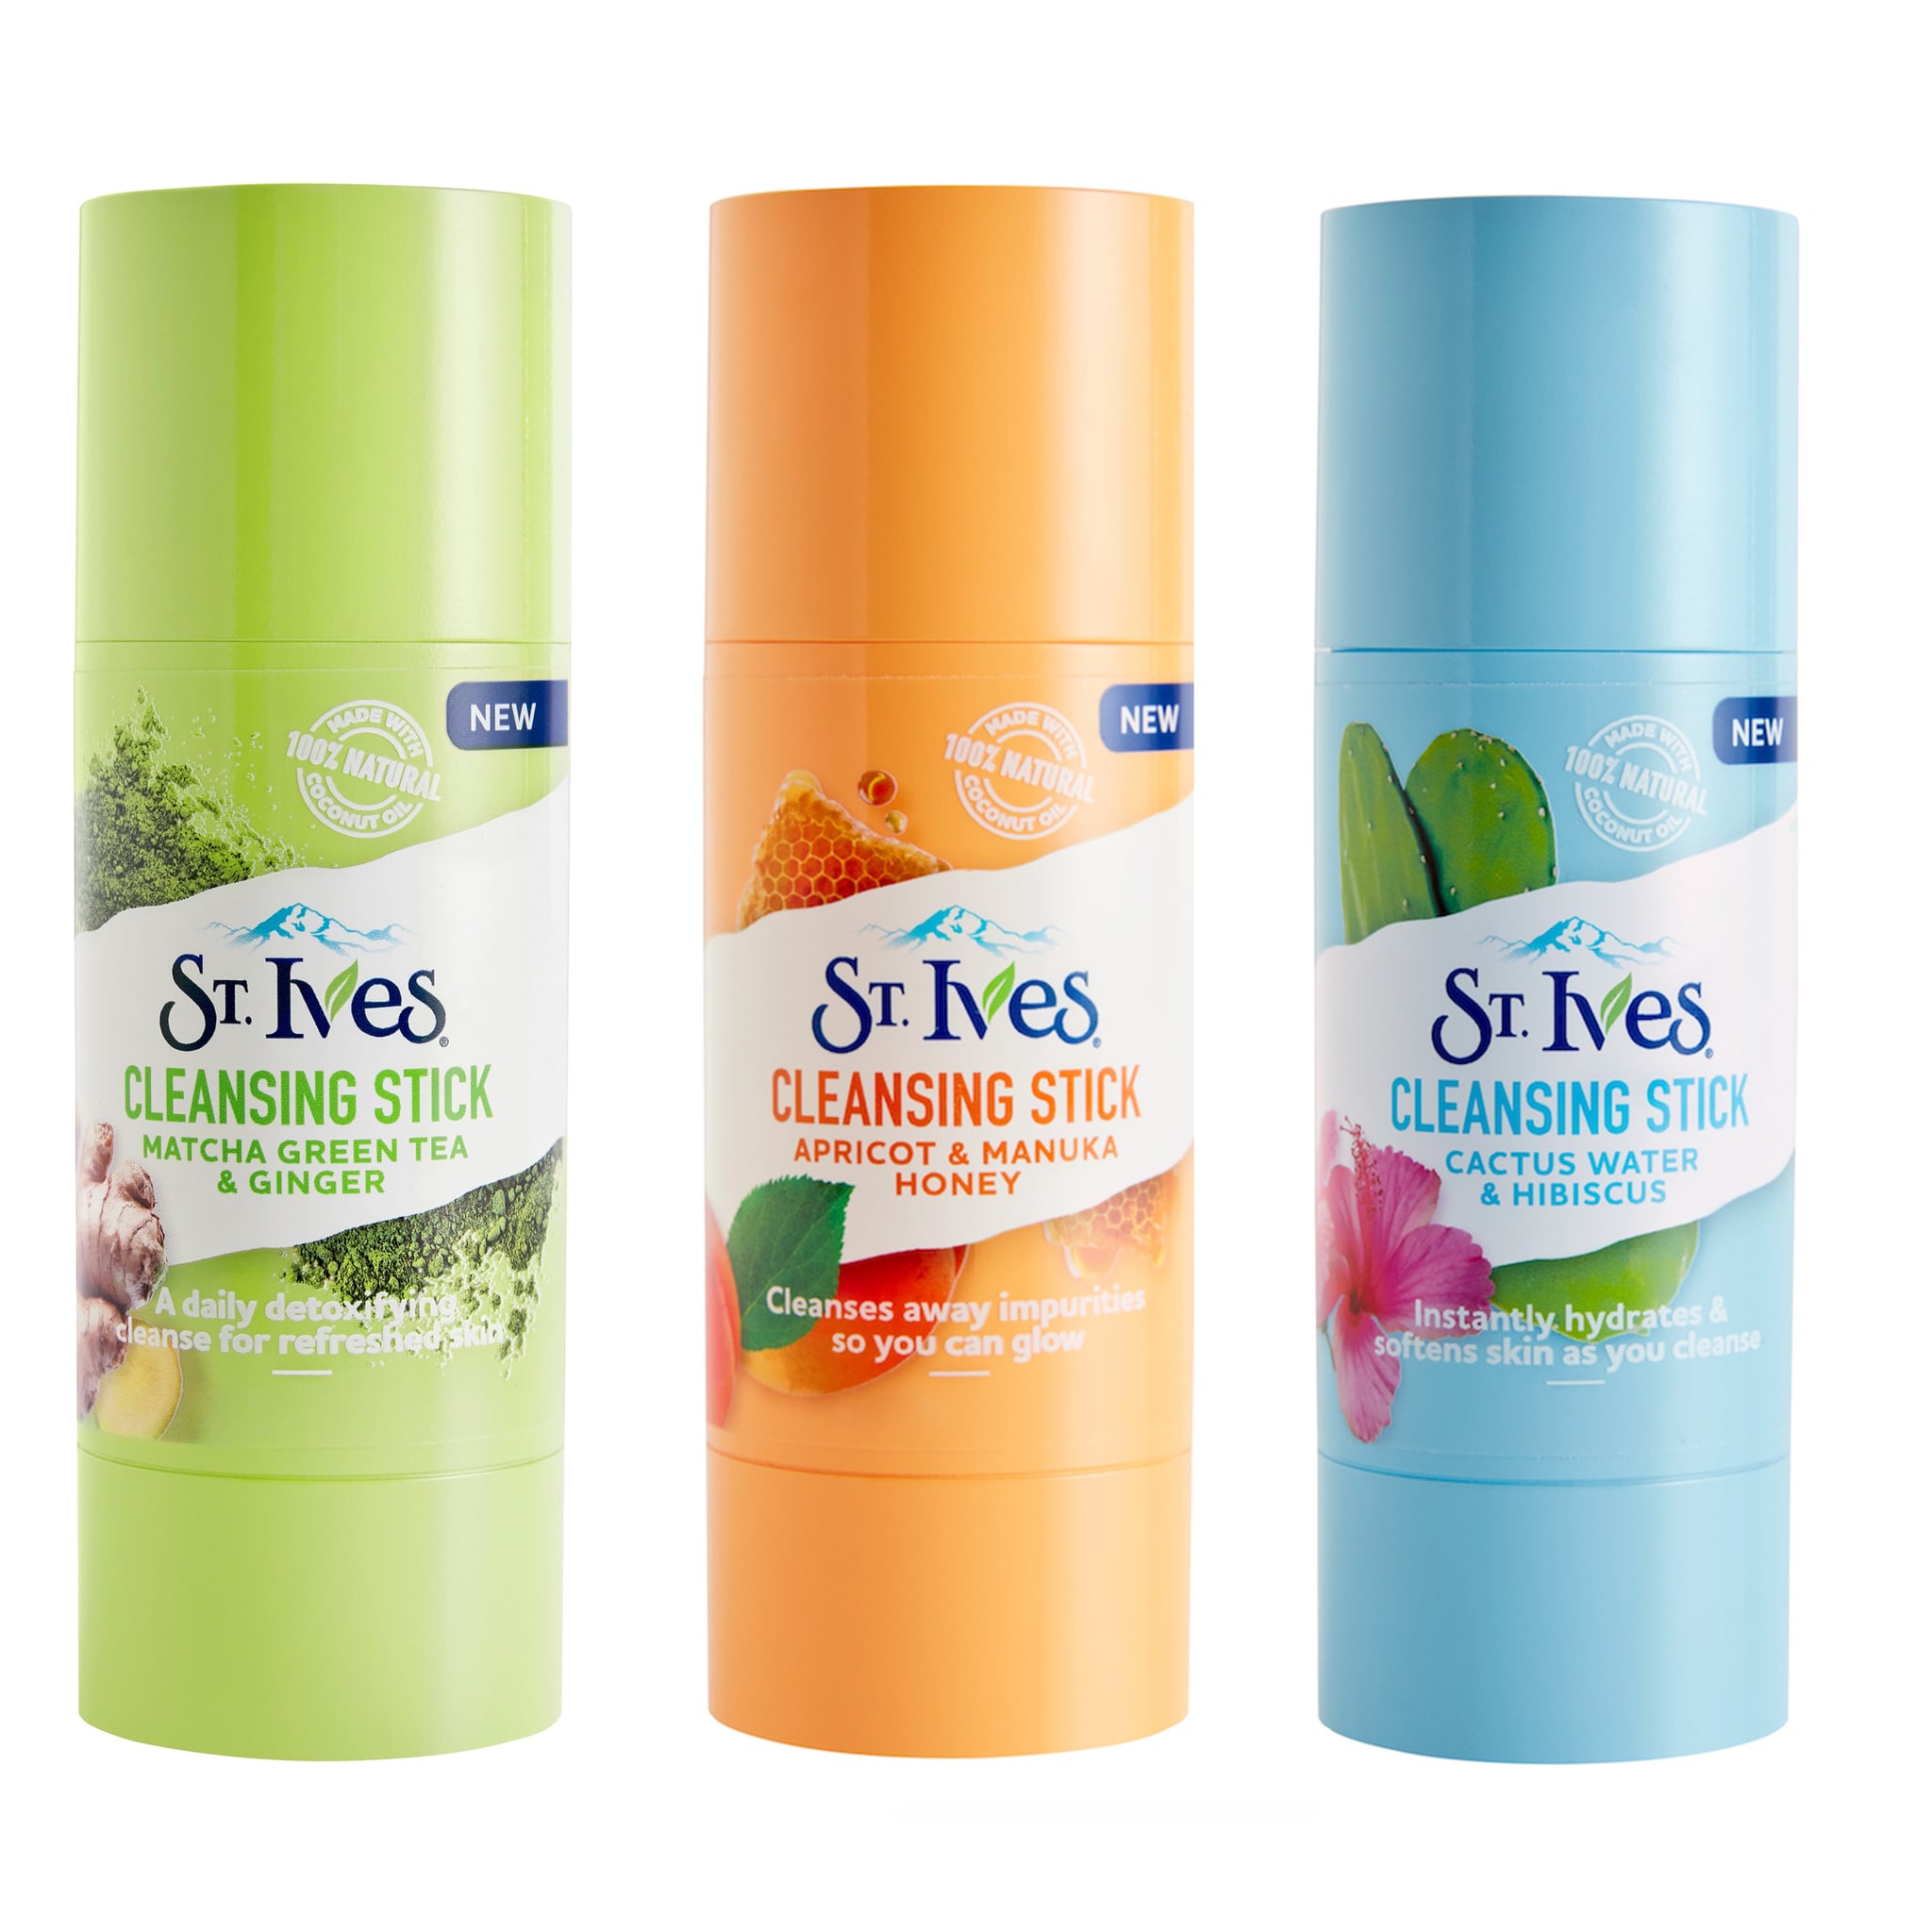 St. Ives Cleansing Stick Review 